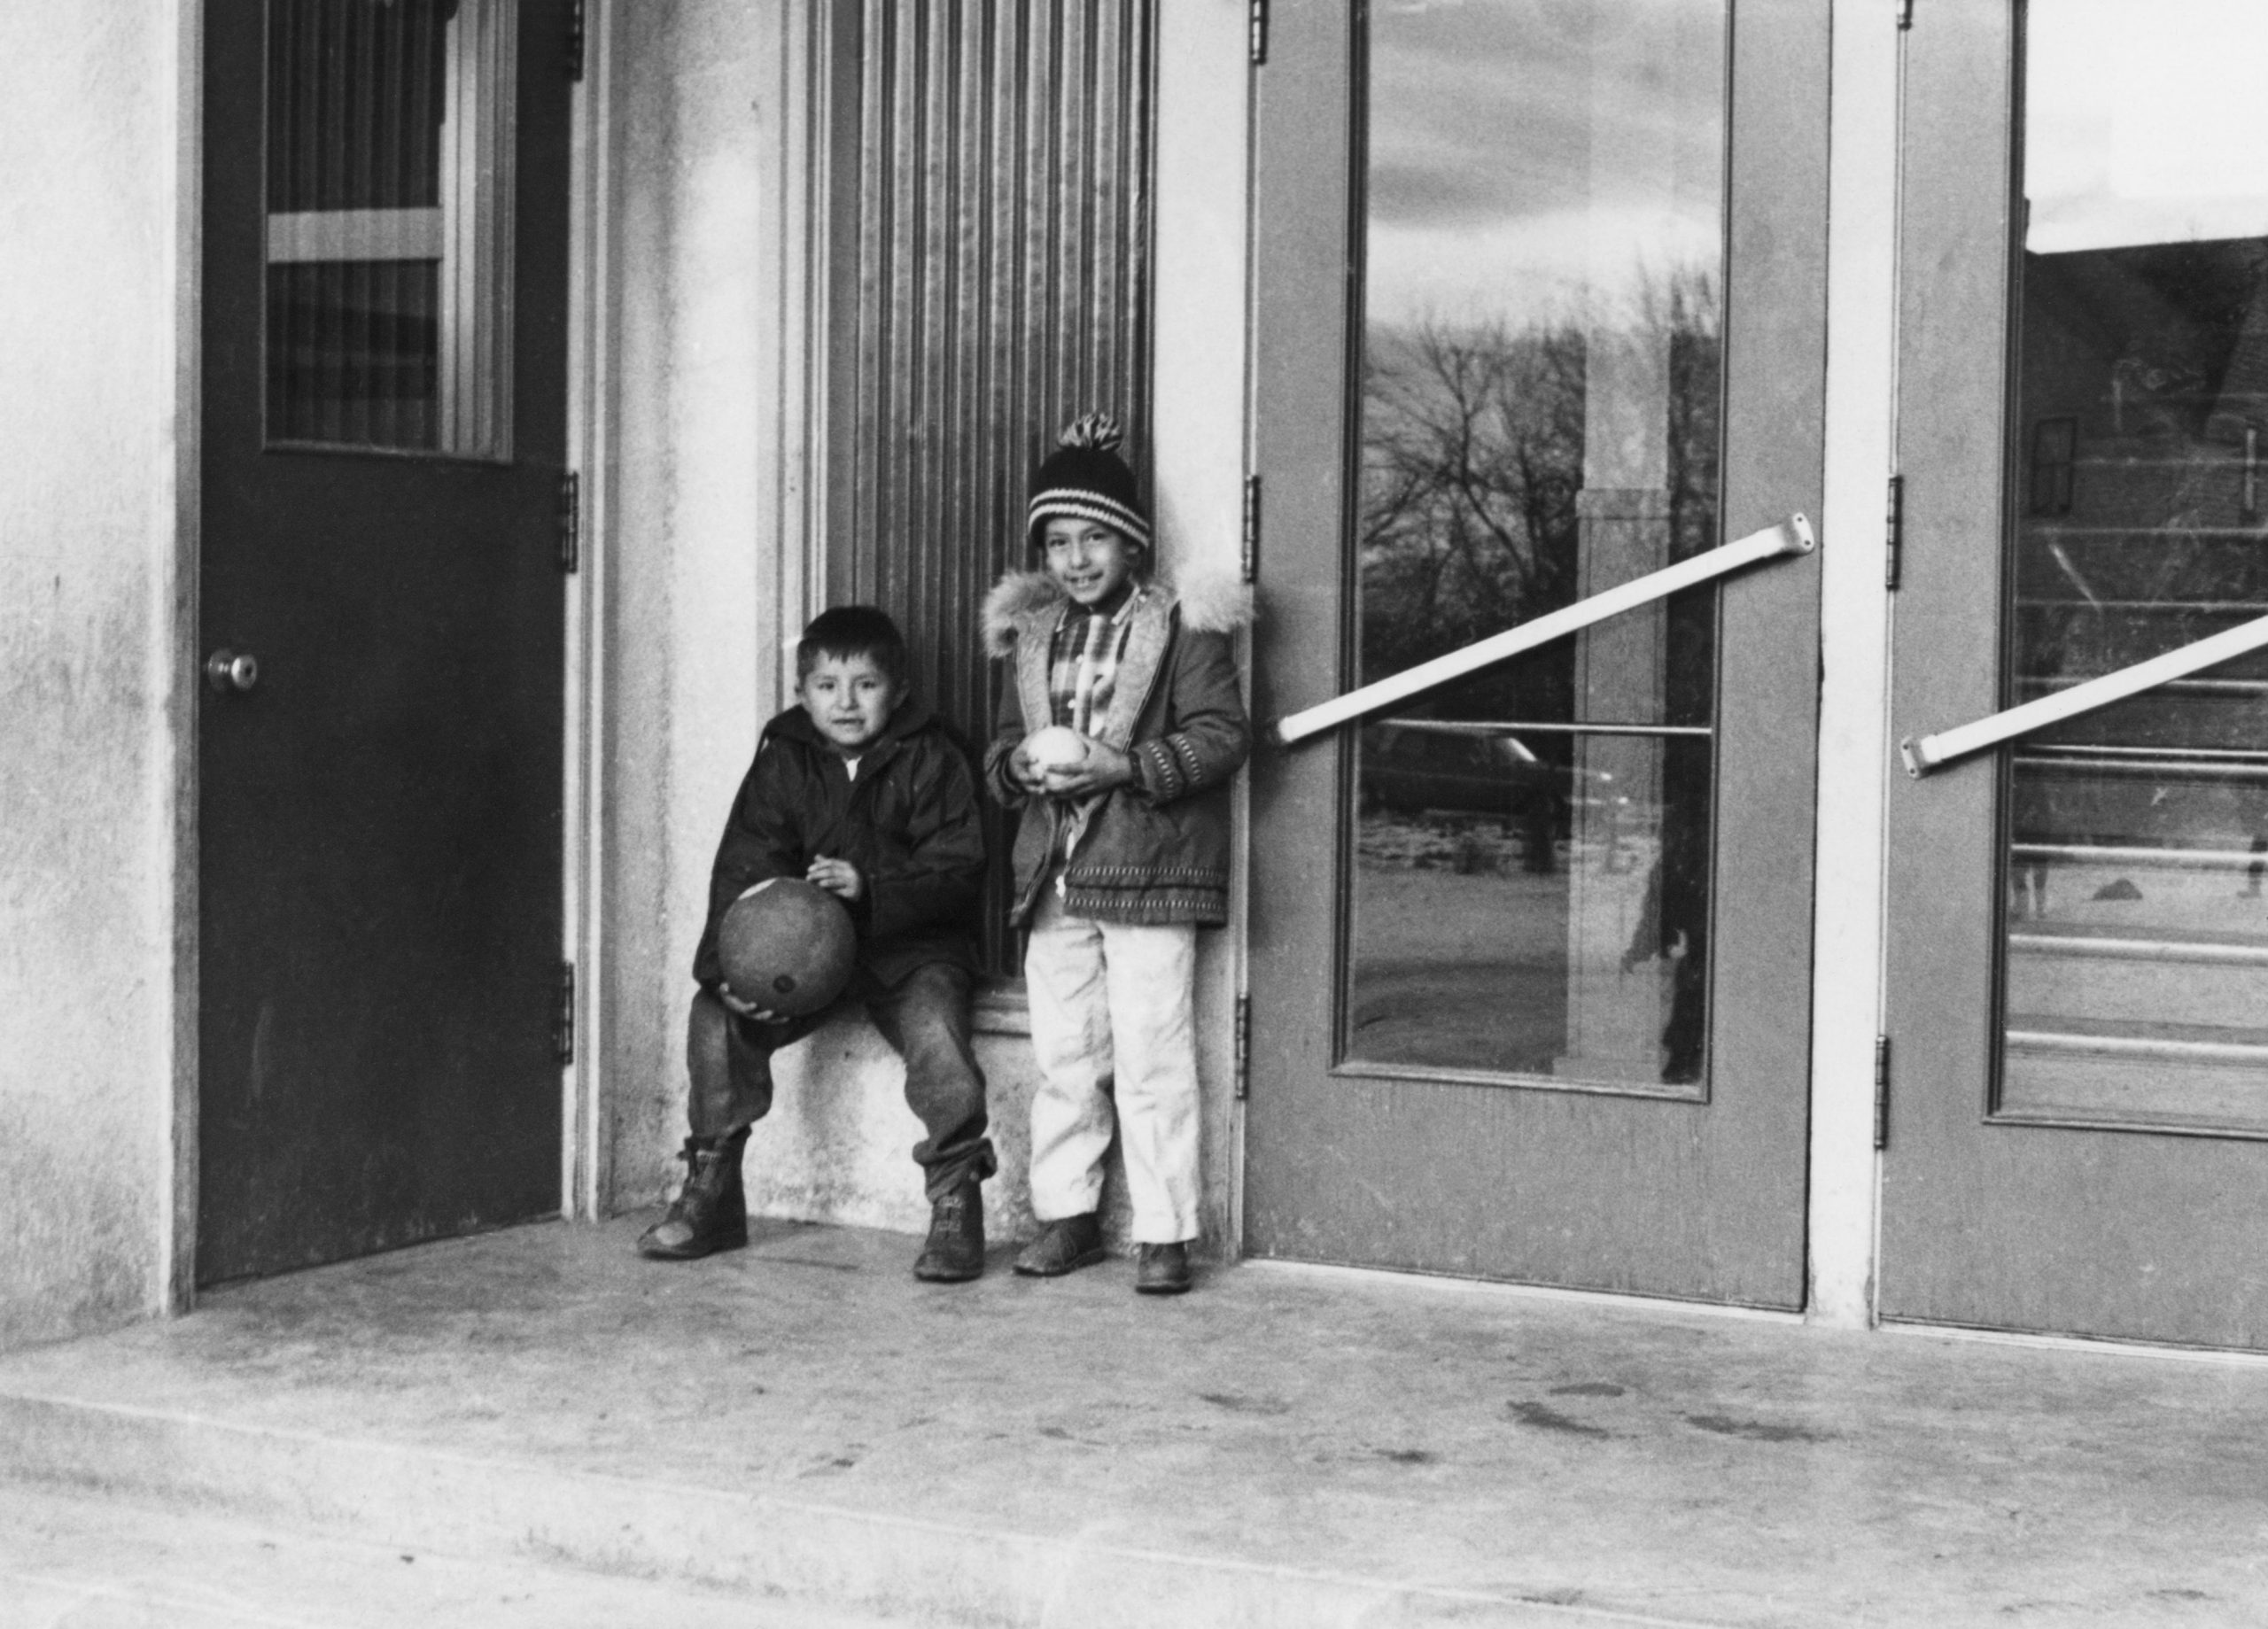 Two boys holding balls, dressed in winter clothes, boots, coats, toque, no gloves, standing outside front doors.